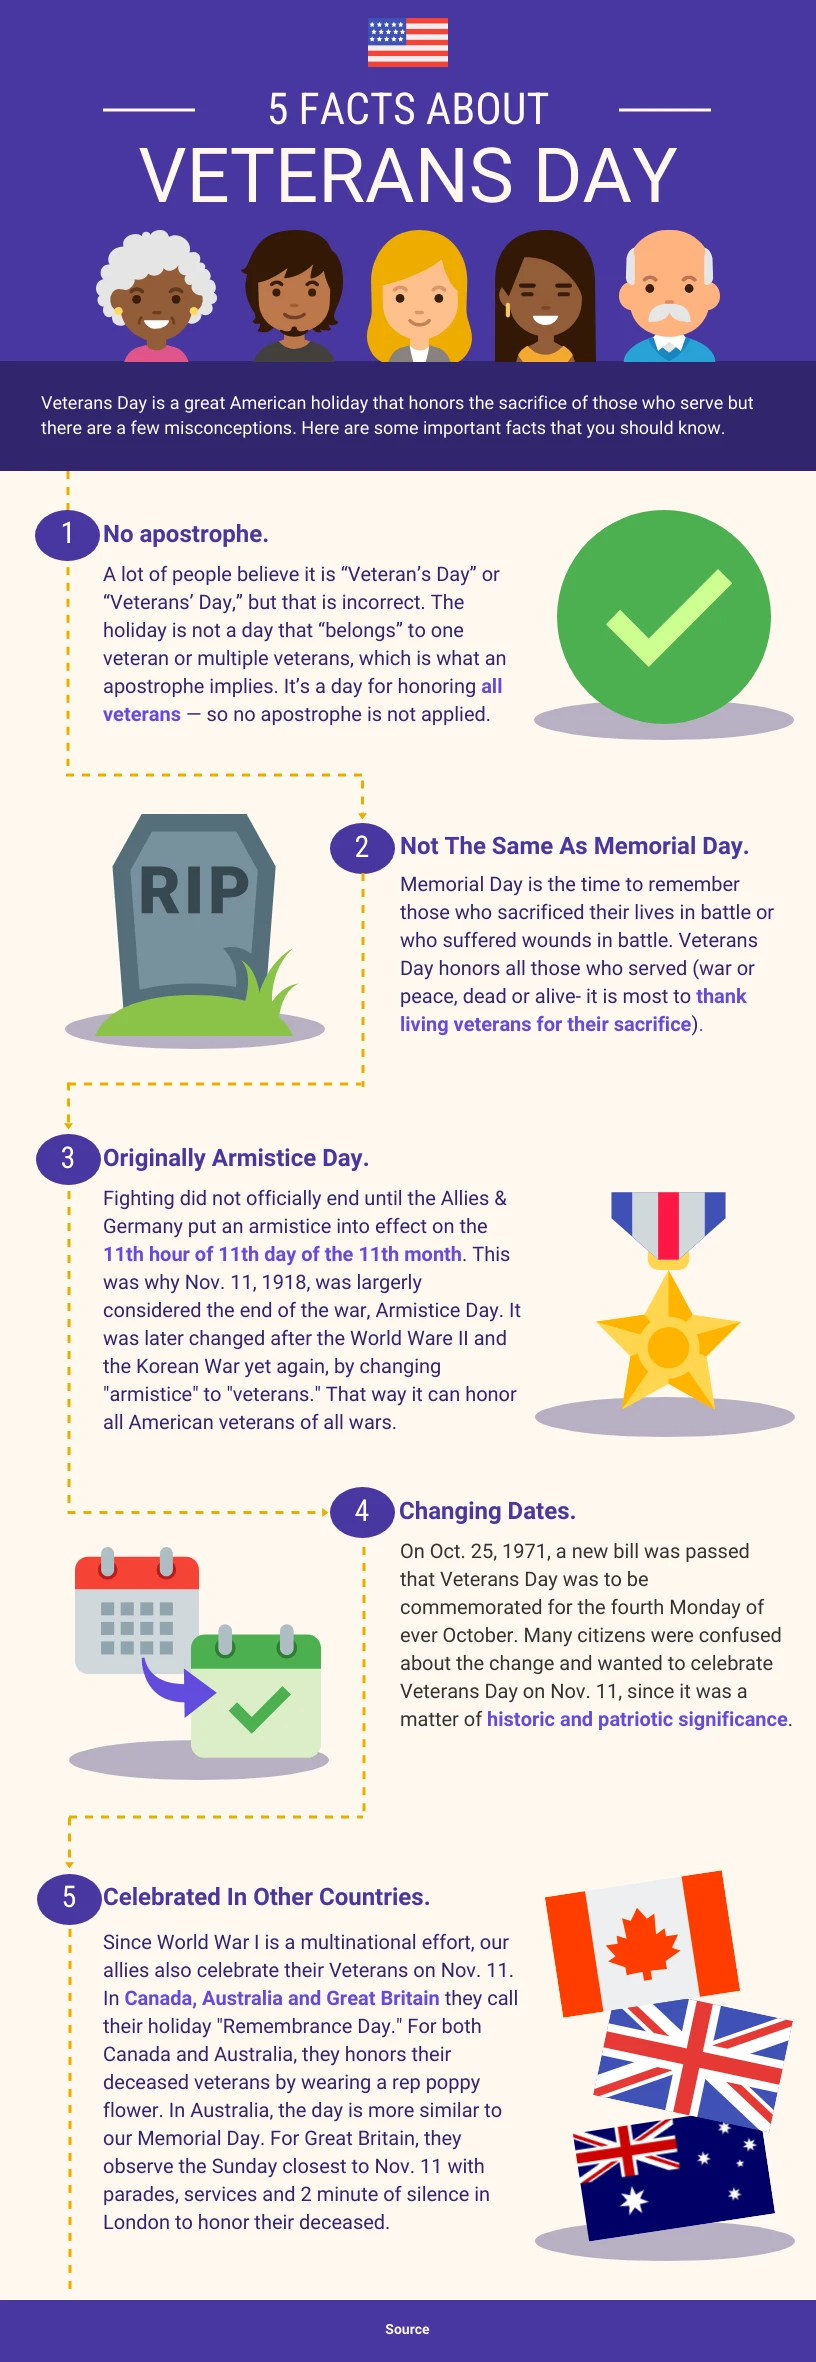 iconic-veterans-day-facts-infographic-venngage